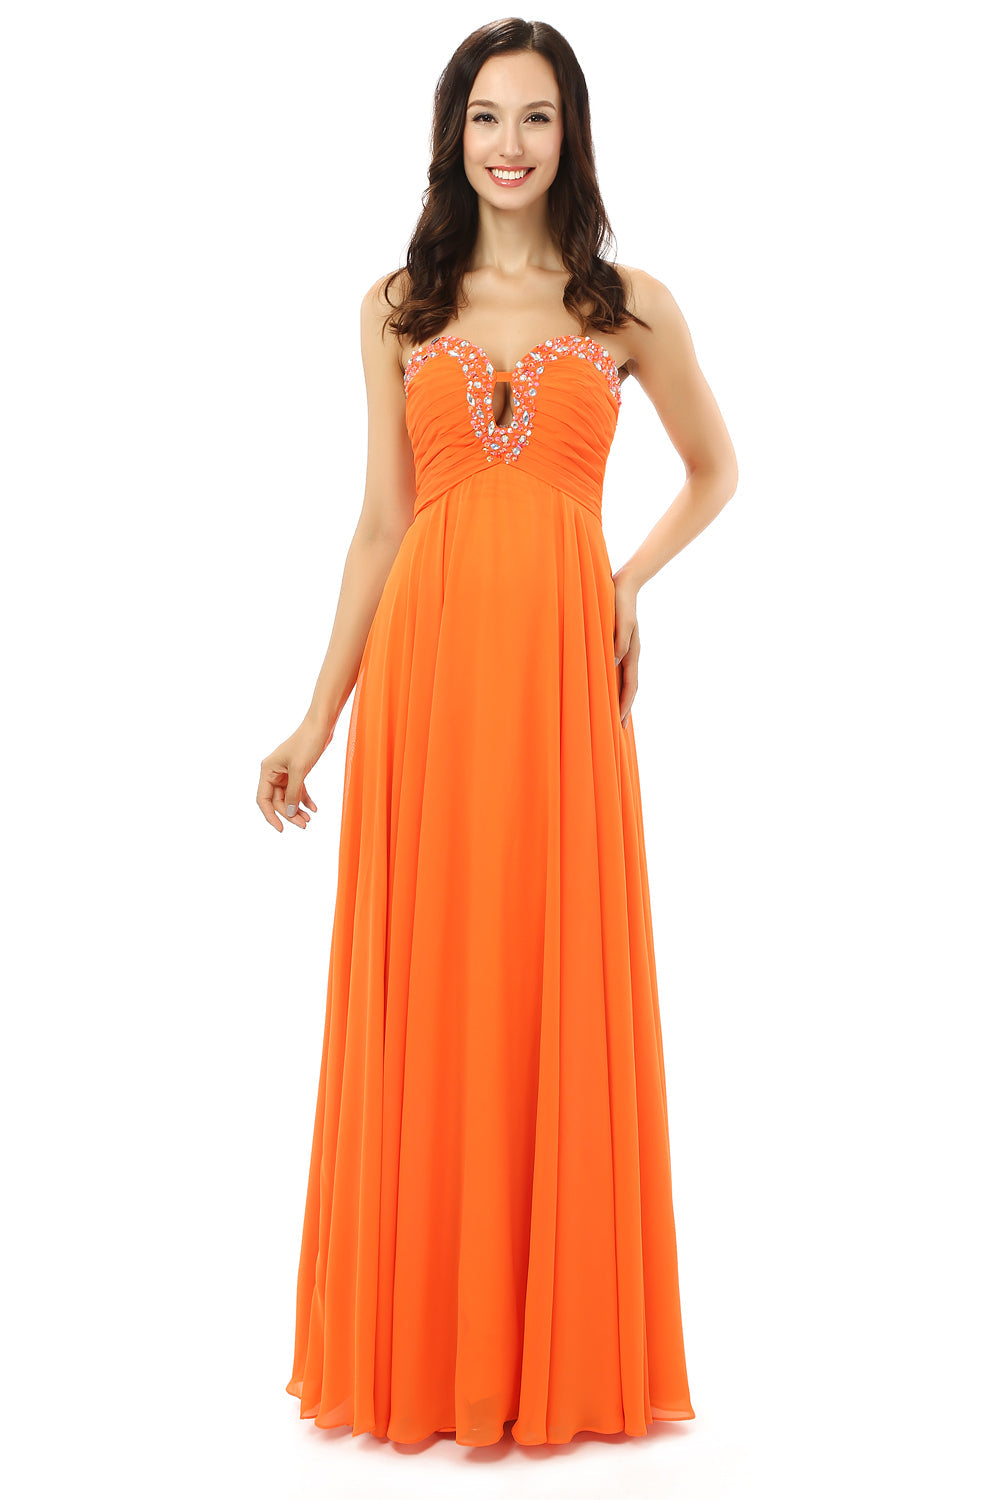 Orange Chiffon Cut Out Sweetheart With Pleats Corset Bridesmaid Dresses outfit, Party Dresses Shopping